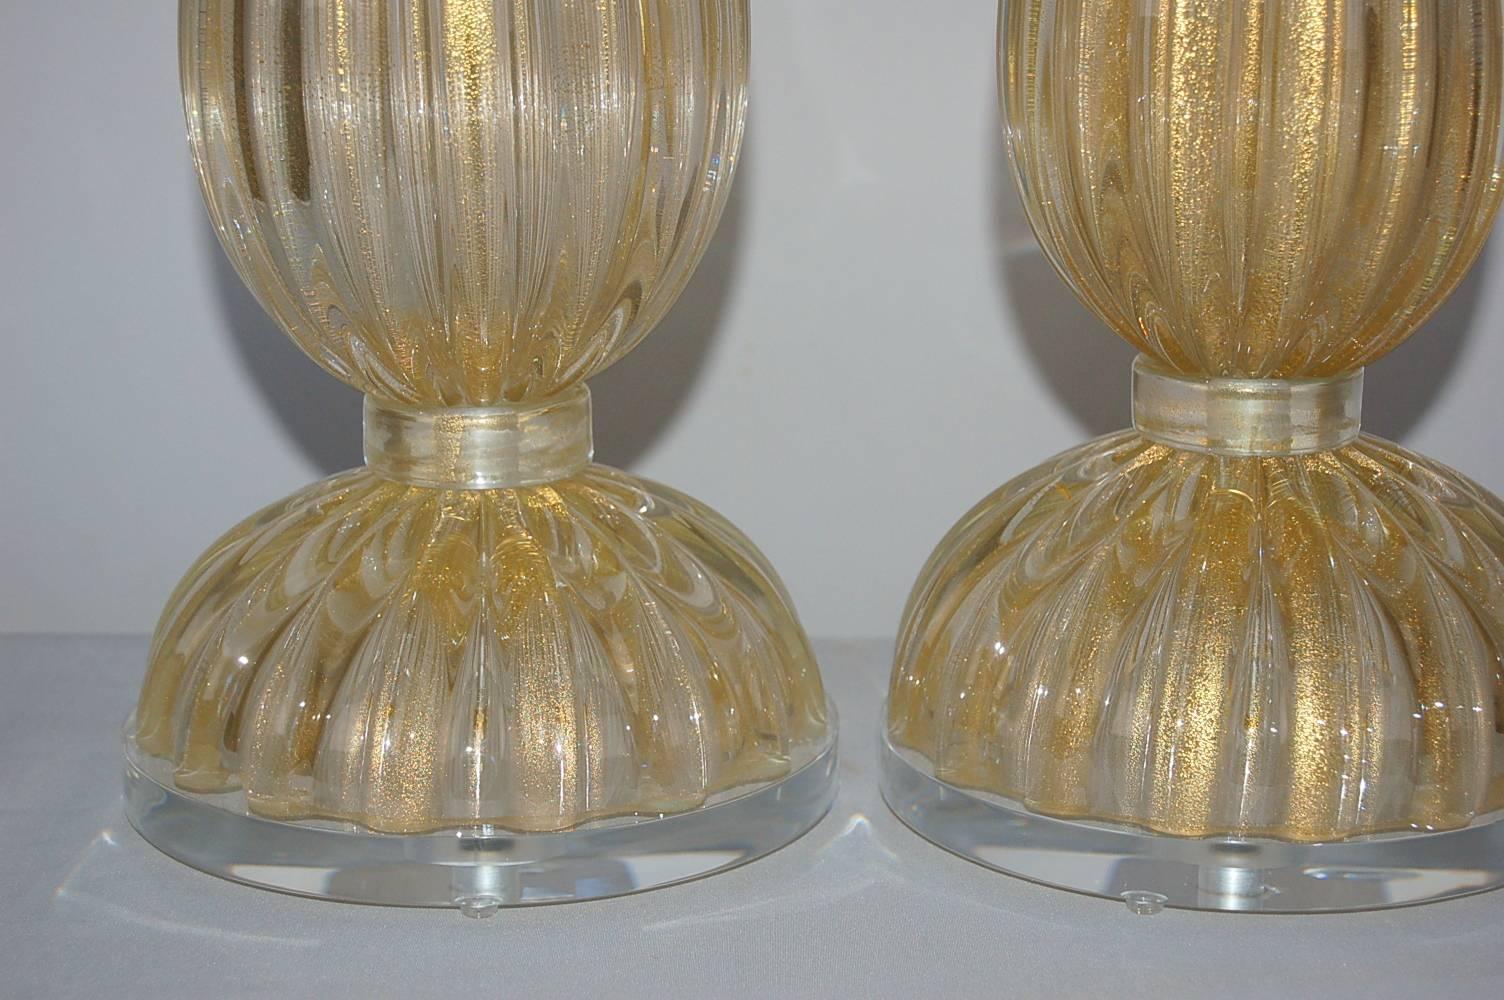 Matched Pair of Murano Table Lamps in Champagne Gold In Excellent Condition For Sale In Little Rock, AR